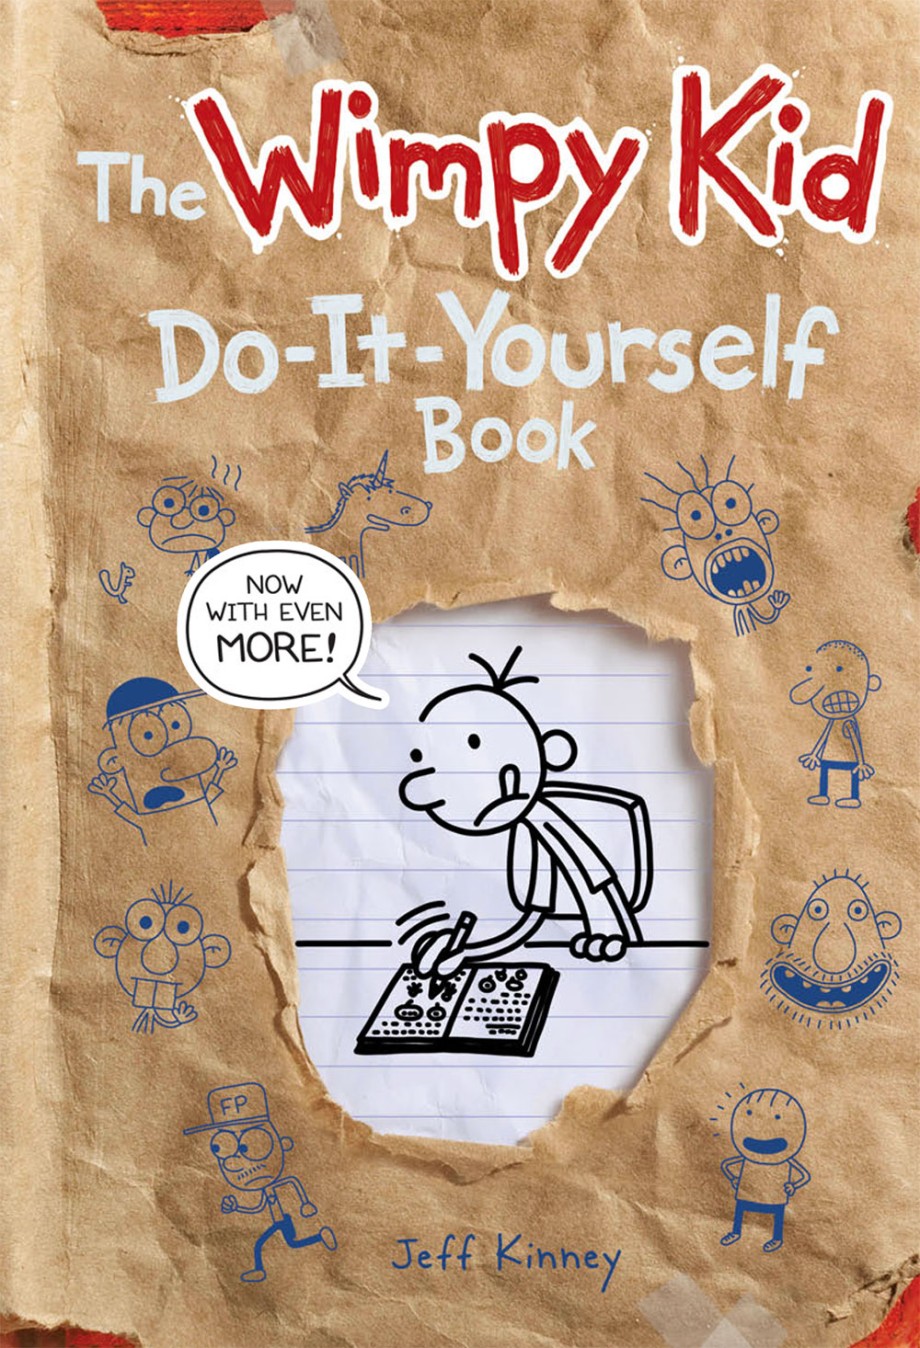 The Wimpy Kid DoItYourself Book (revised and expanded edition) (Diary